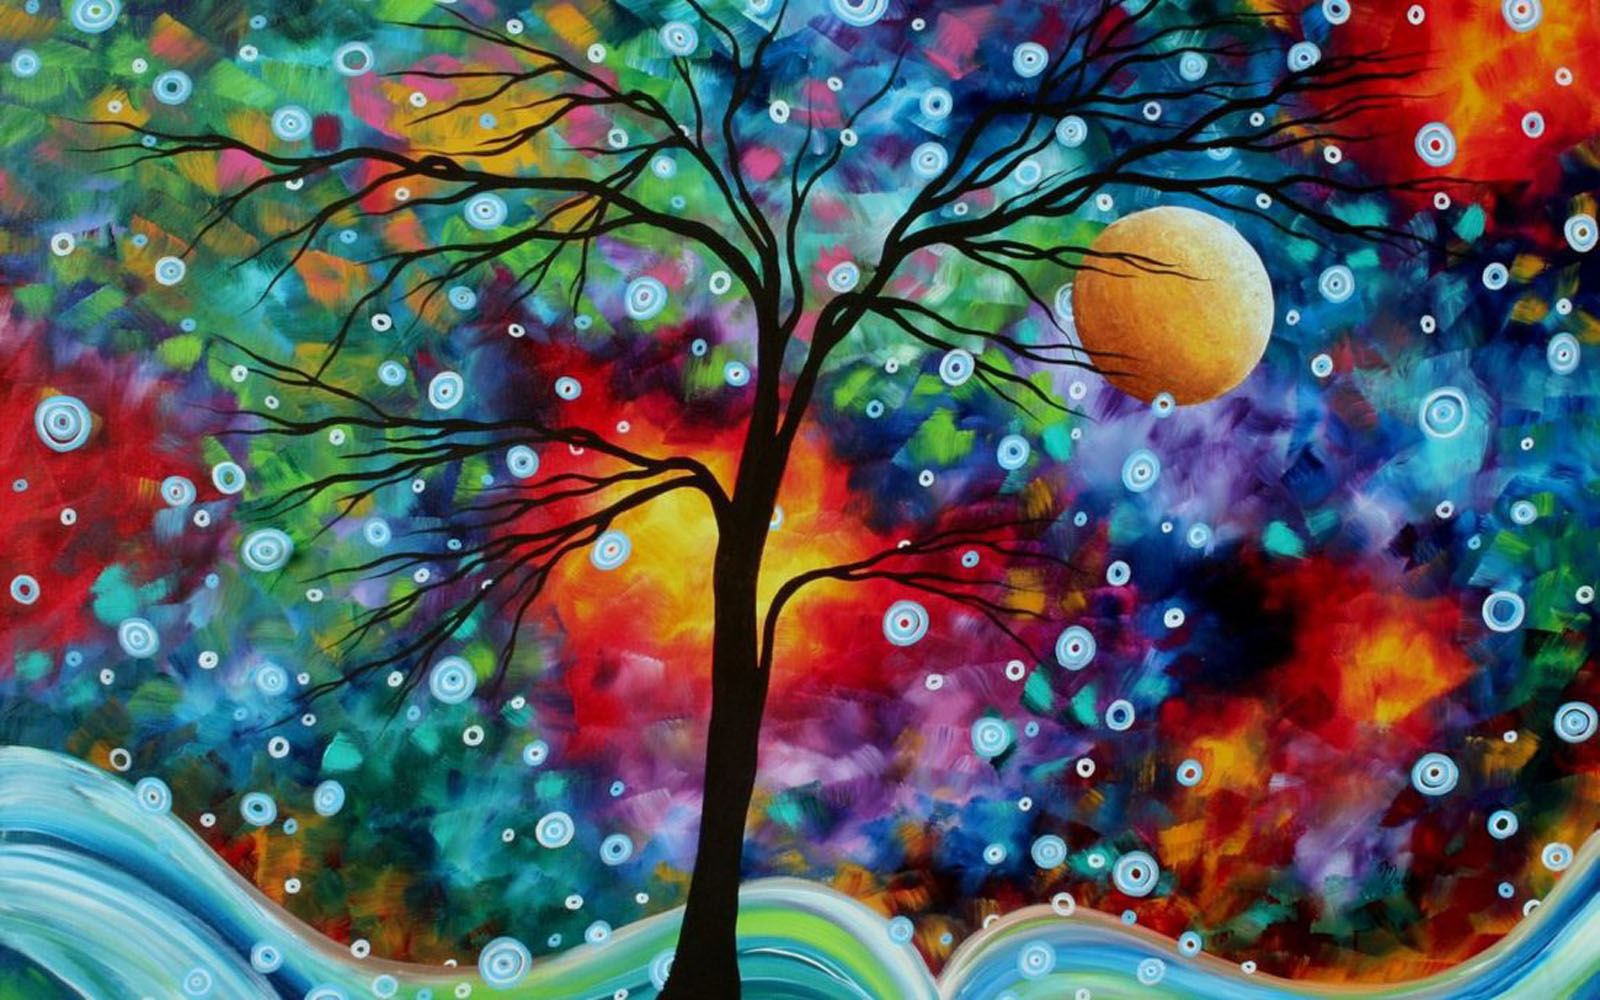 Tag Colorful Paintings Wallpaper Background Photos Image And